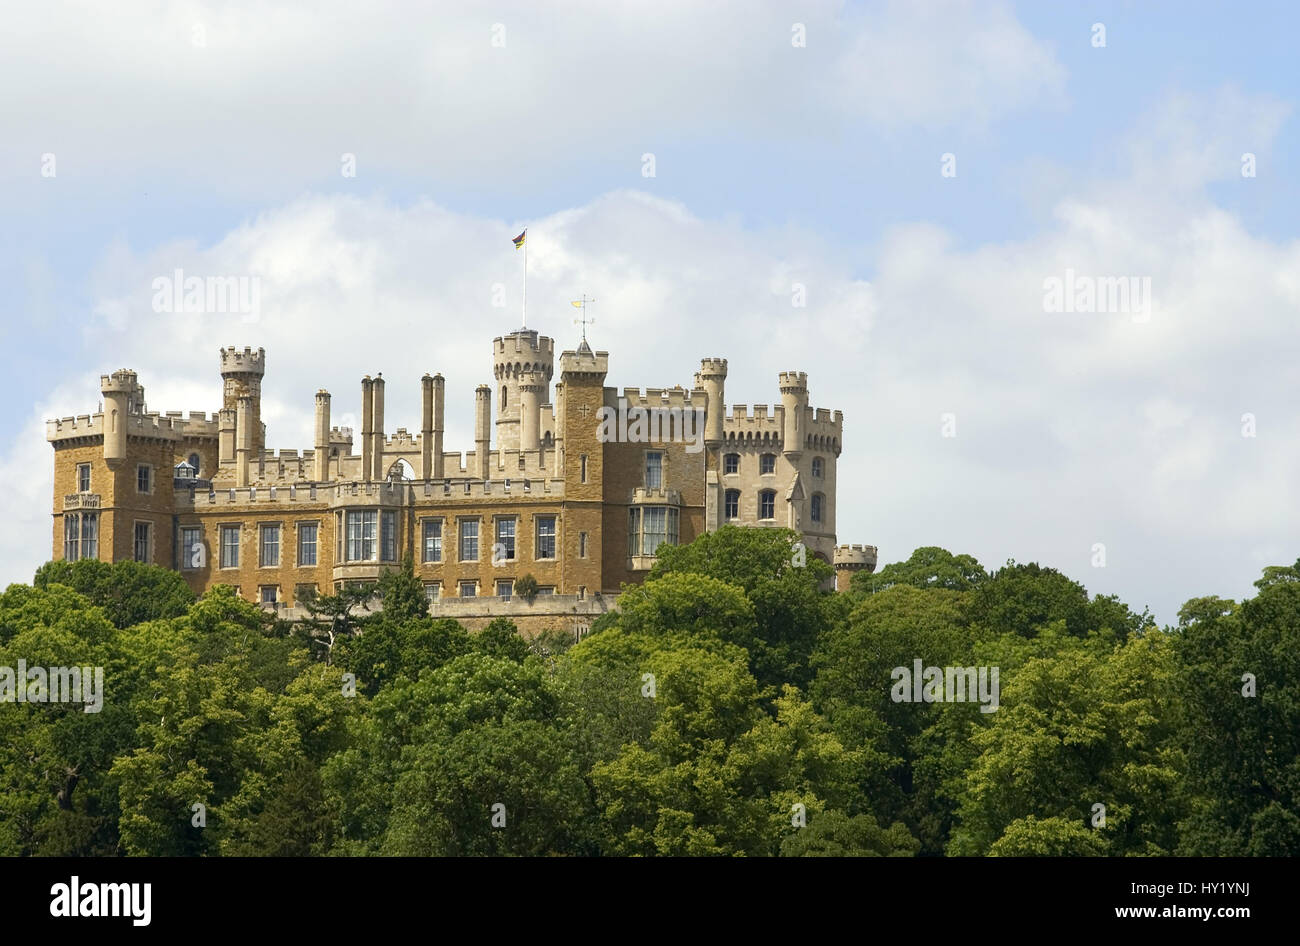 Belvoir Castle is a stately home in the English county of Leicestershire, overlooking the Vale of Belvoir.   Blick auf die Burg Belvoir in Leicestersh Stock Photo